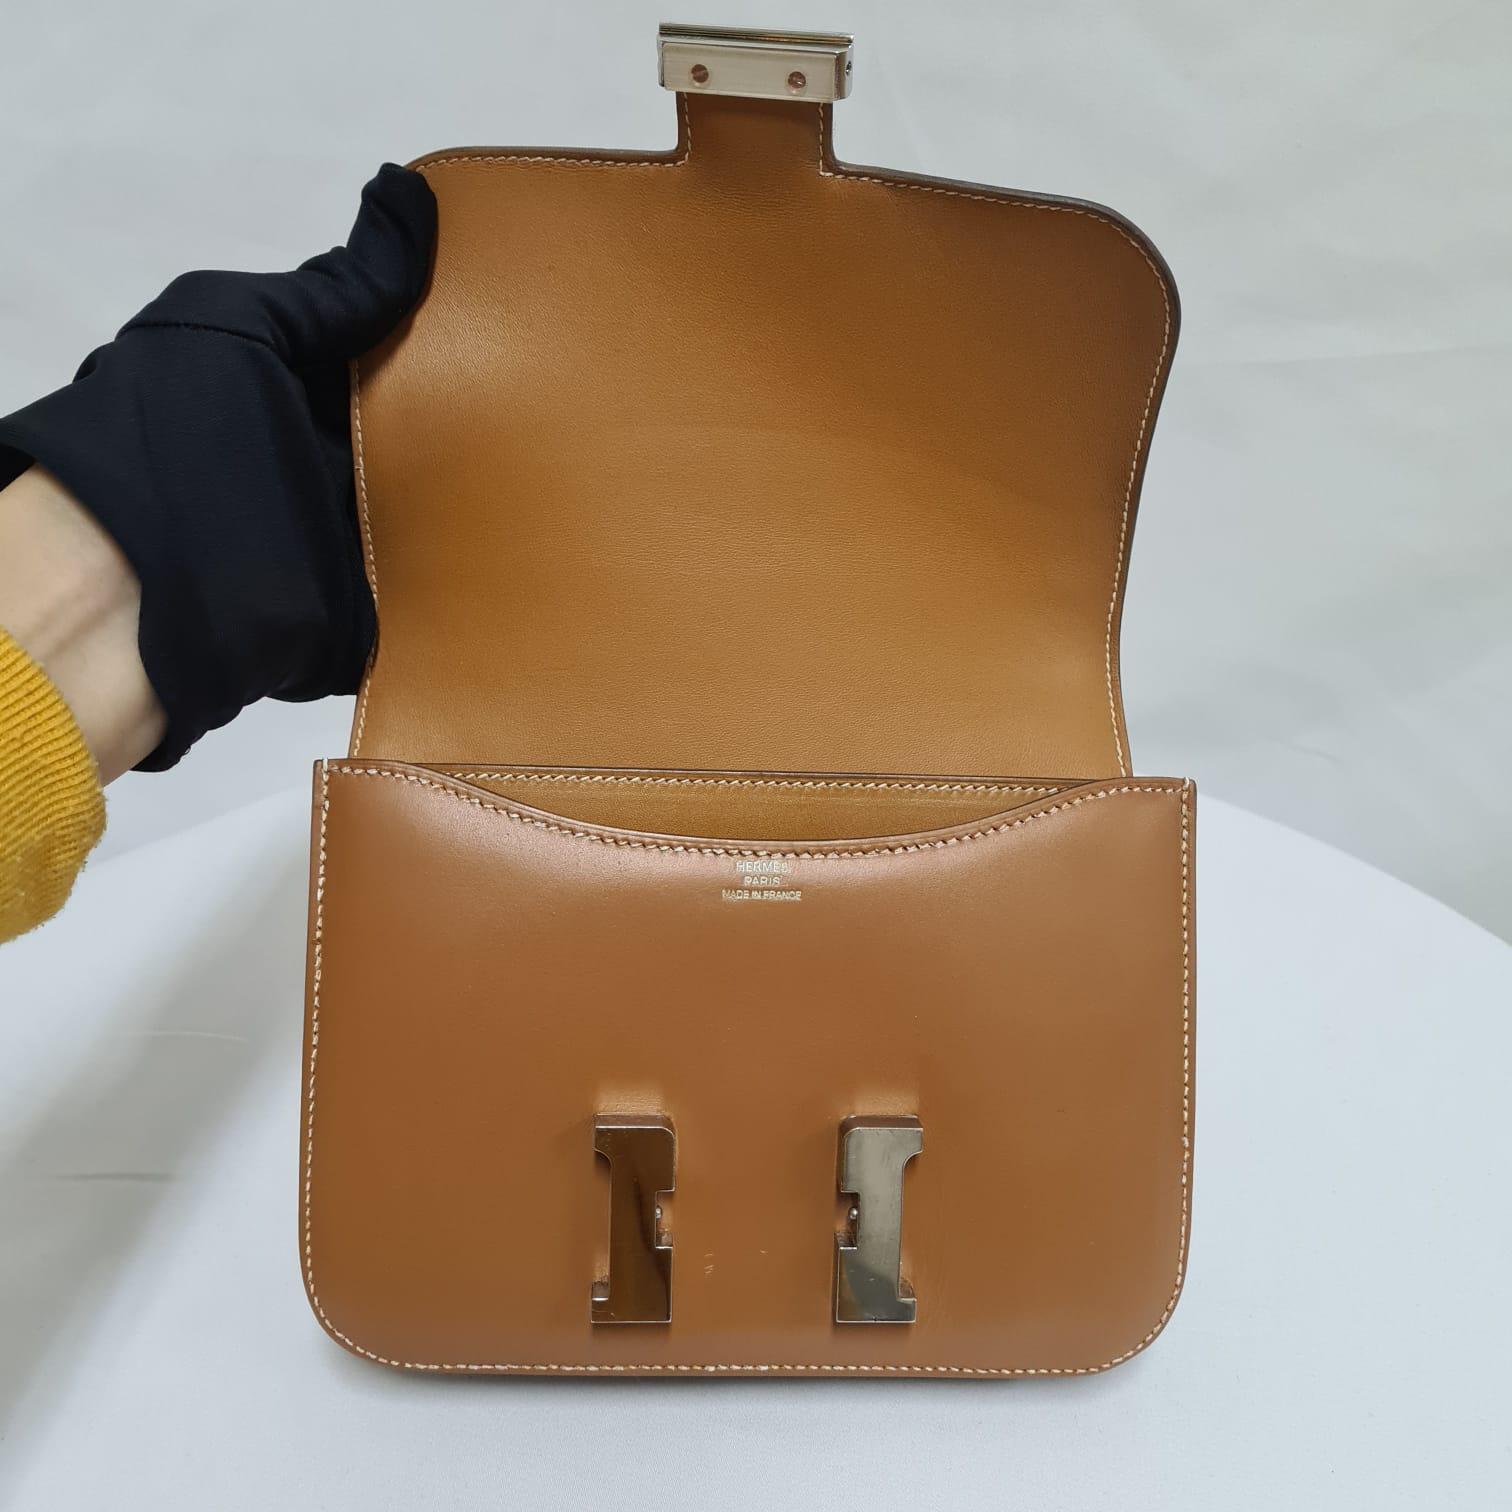 A classic hermes constance 18 in butler leather. Beautiful condition, with minor scratches under the hardware opening. Beautiful butler leather which is a box/swift like smooth leather with contrast stitching. Stamp C (2018). Comes with its box,